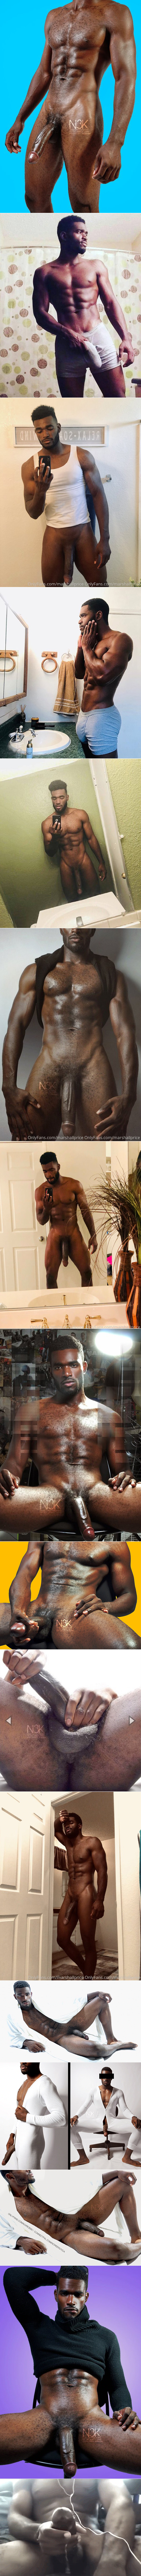 OnlyFans-Marshall-Price-Black-Hunk-Black-Model-Extra-Big-Dick-Shower-Uncut-Cock-Male-Feet